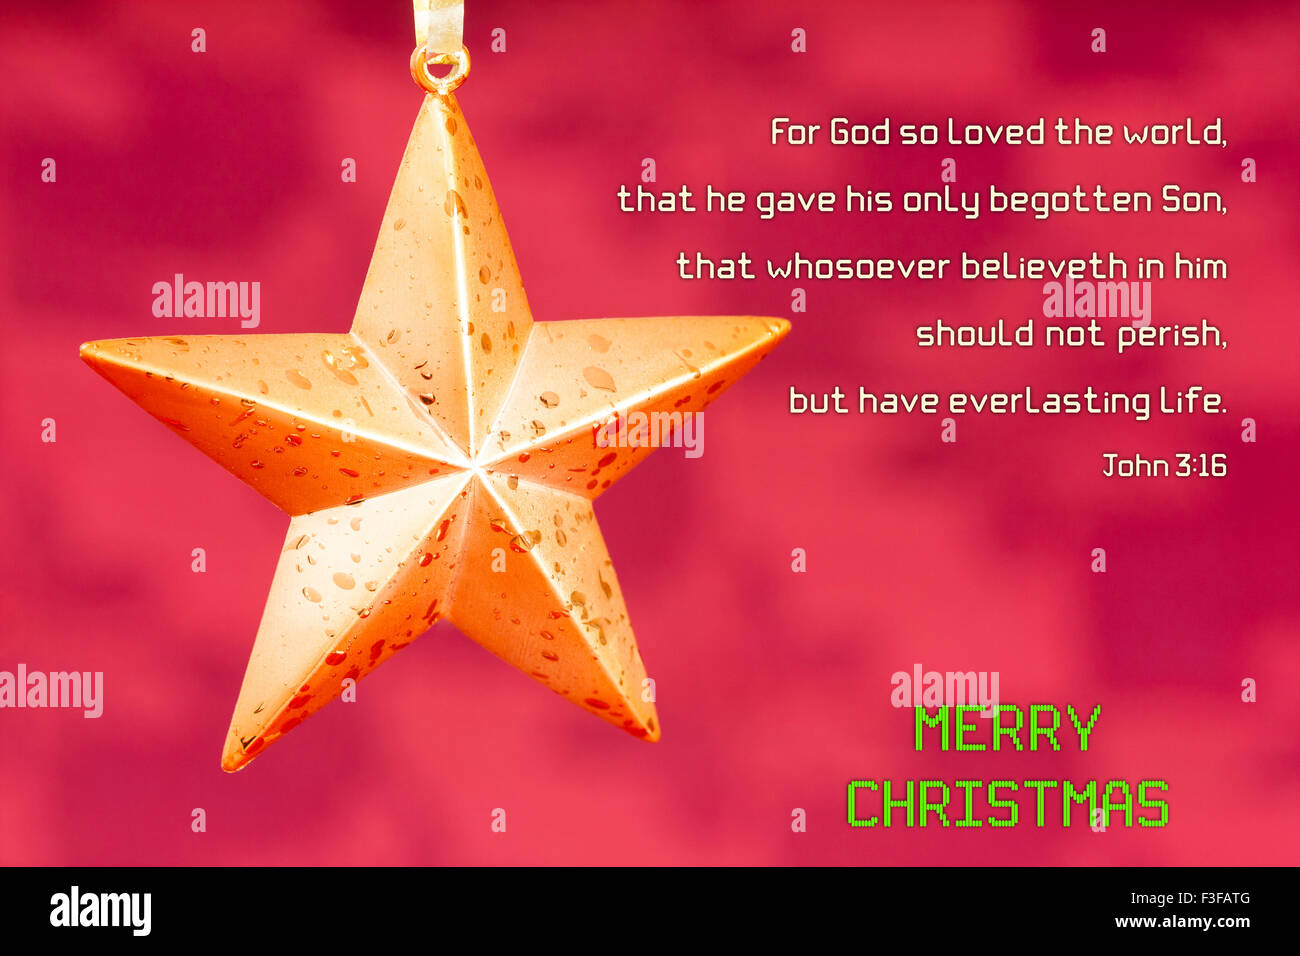 A star shaped Christmas ornament set against a maroon red background. Bible verse John 3:16 is displayed with Christmas message. Stock Photo